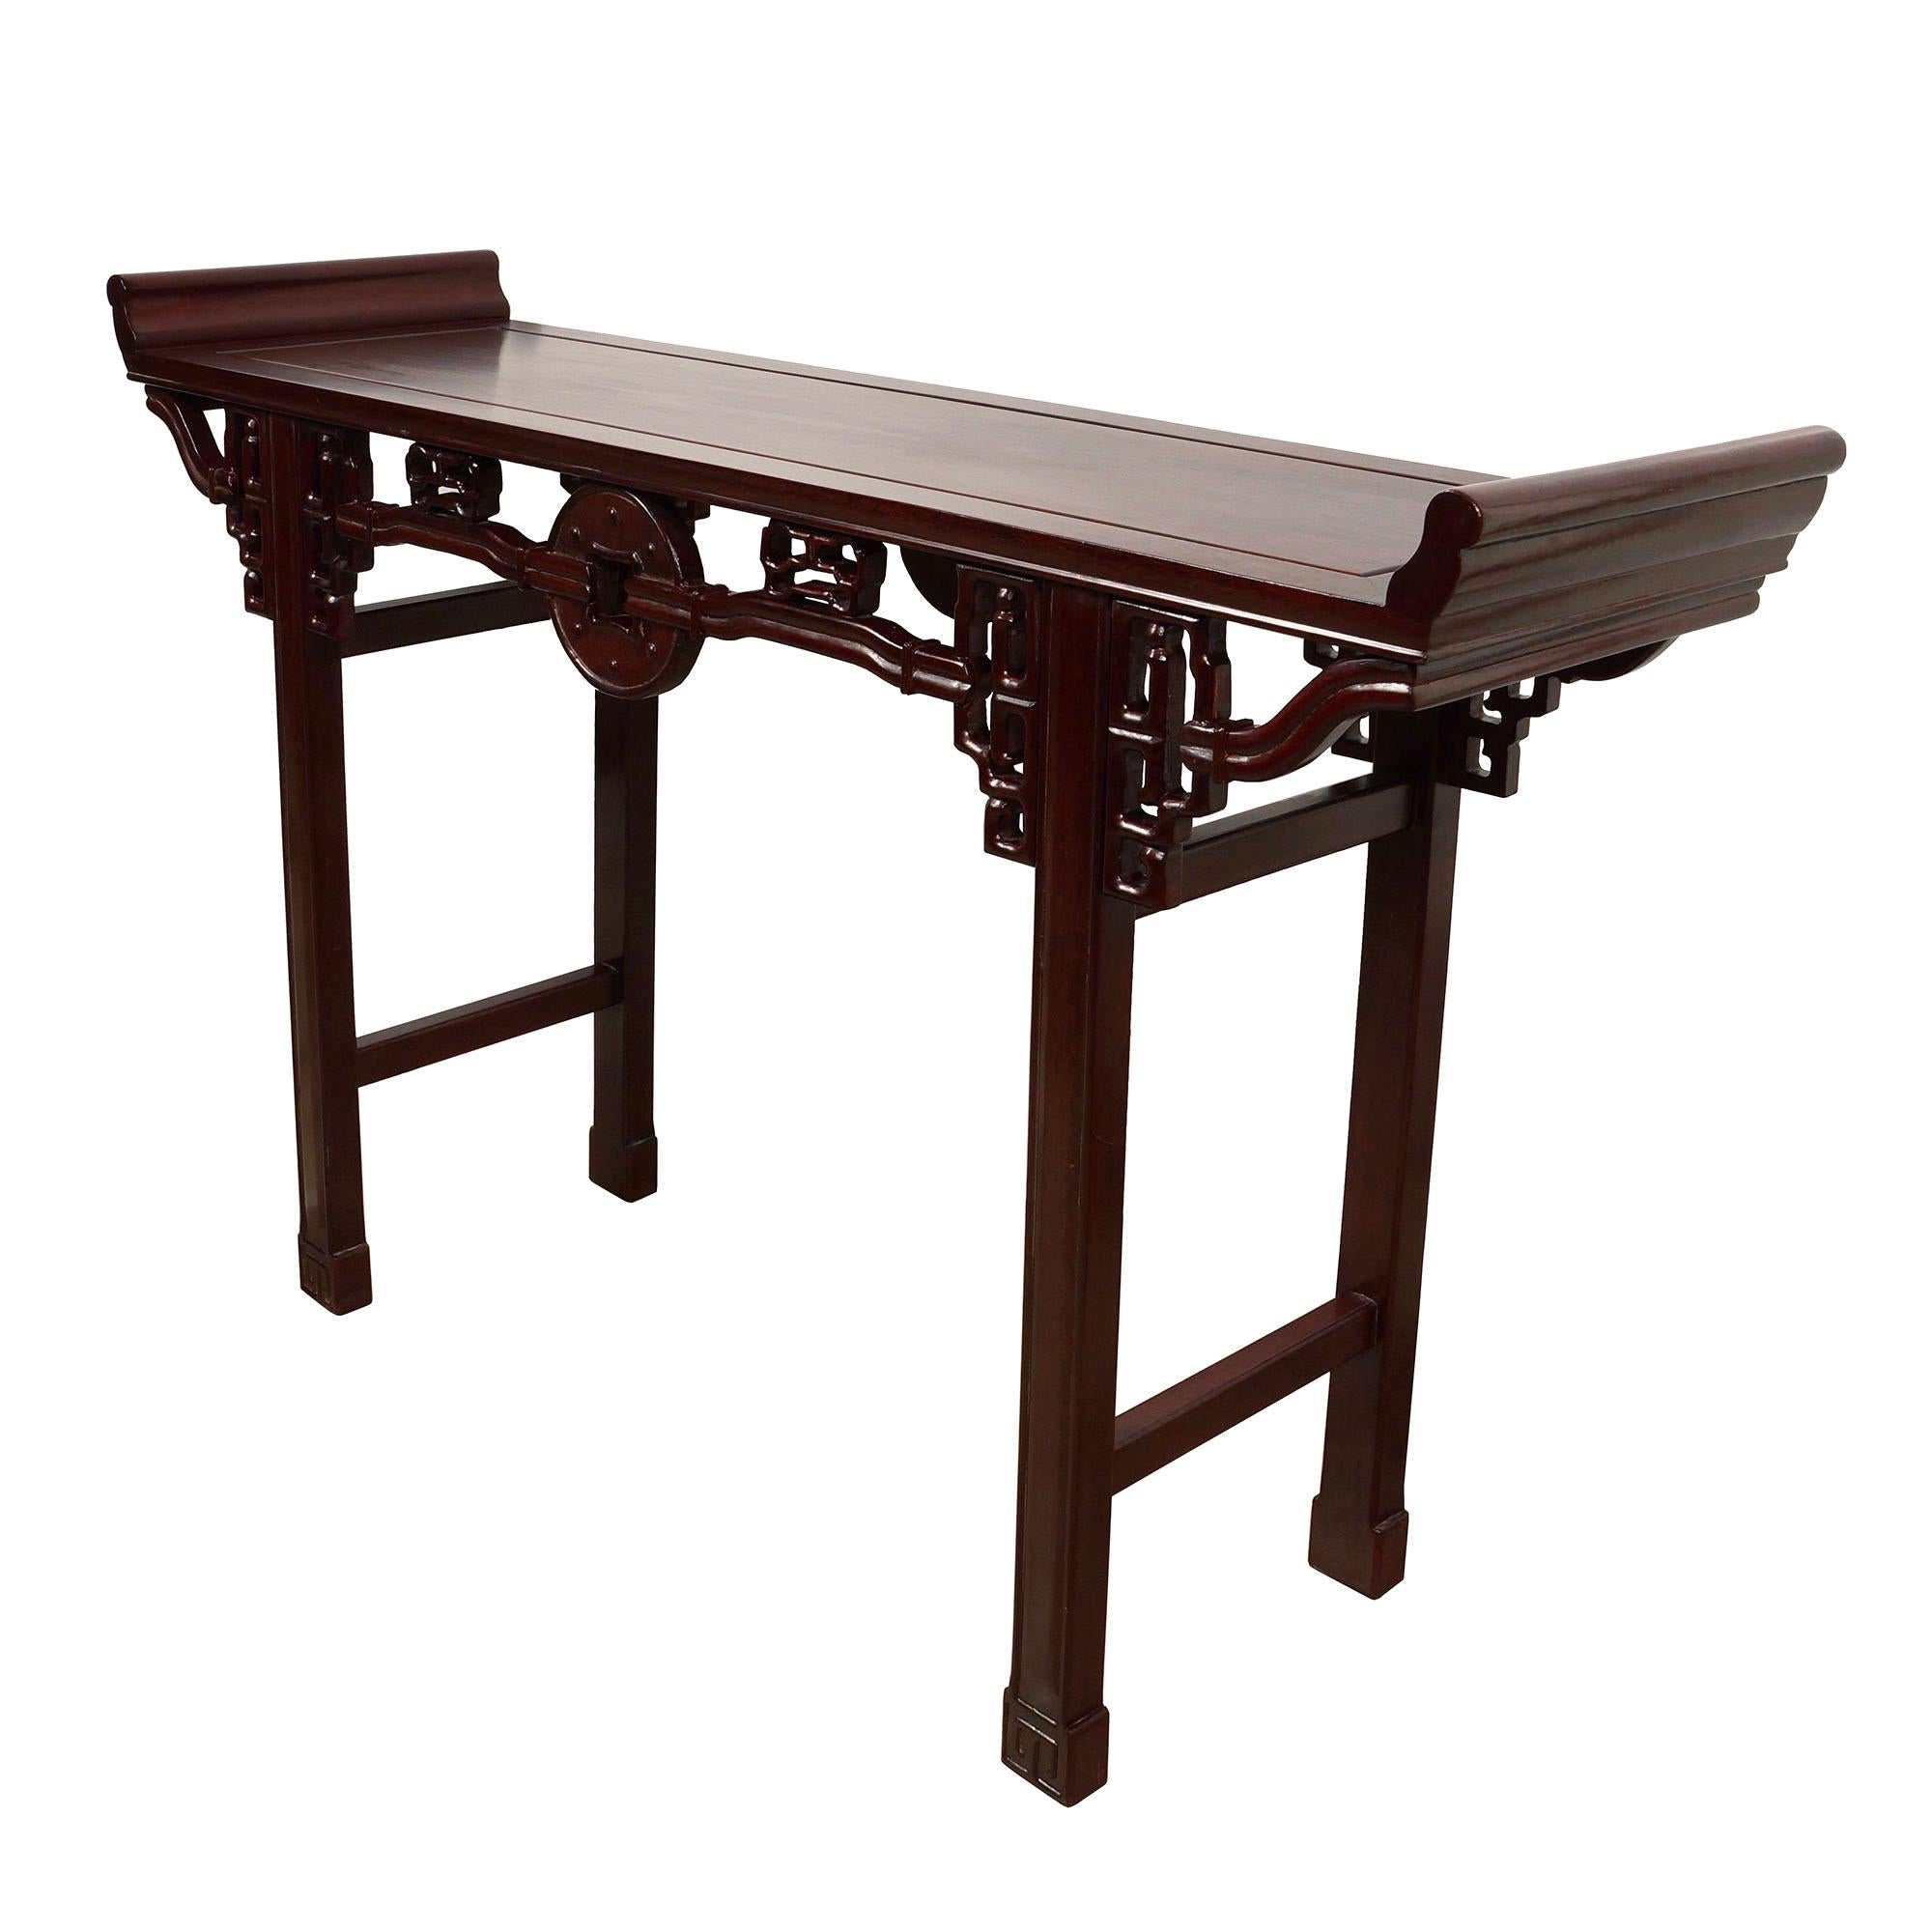 This carved altar table was made from solid Rosewood in about 1900 - 1940's and still maintained very good condition. This table has beautiful open carving works of Chinese traditional folks art design on the both side and the legs. You can use it